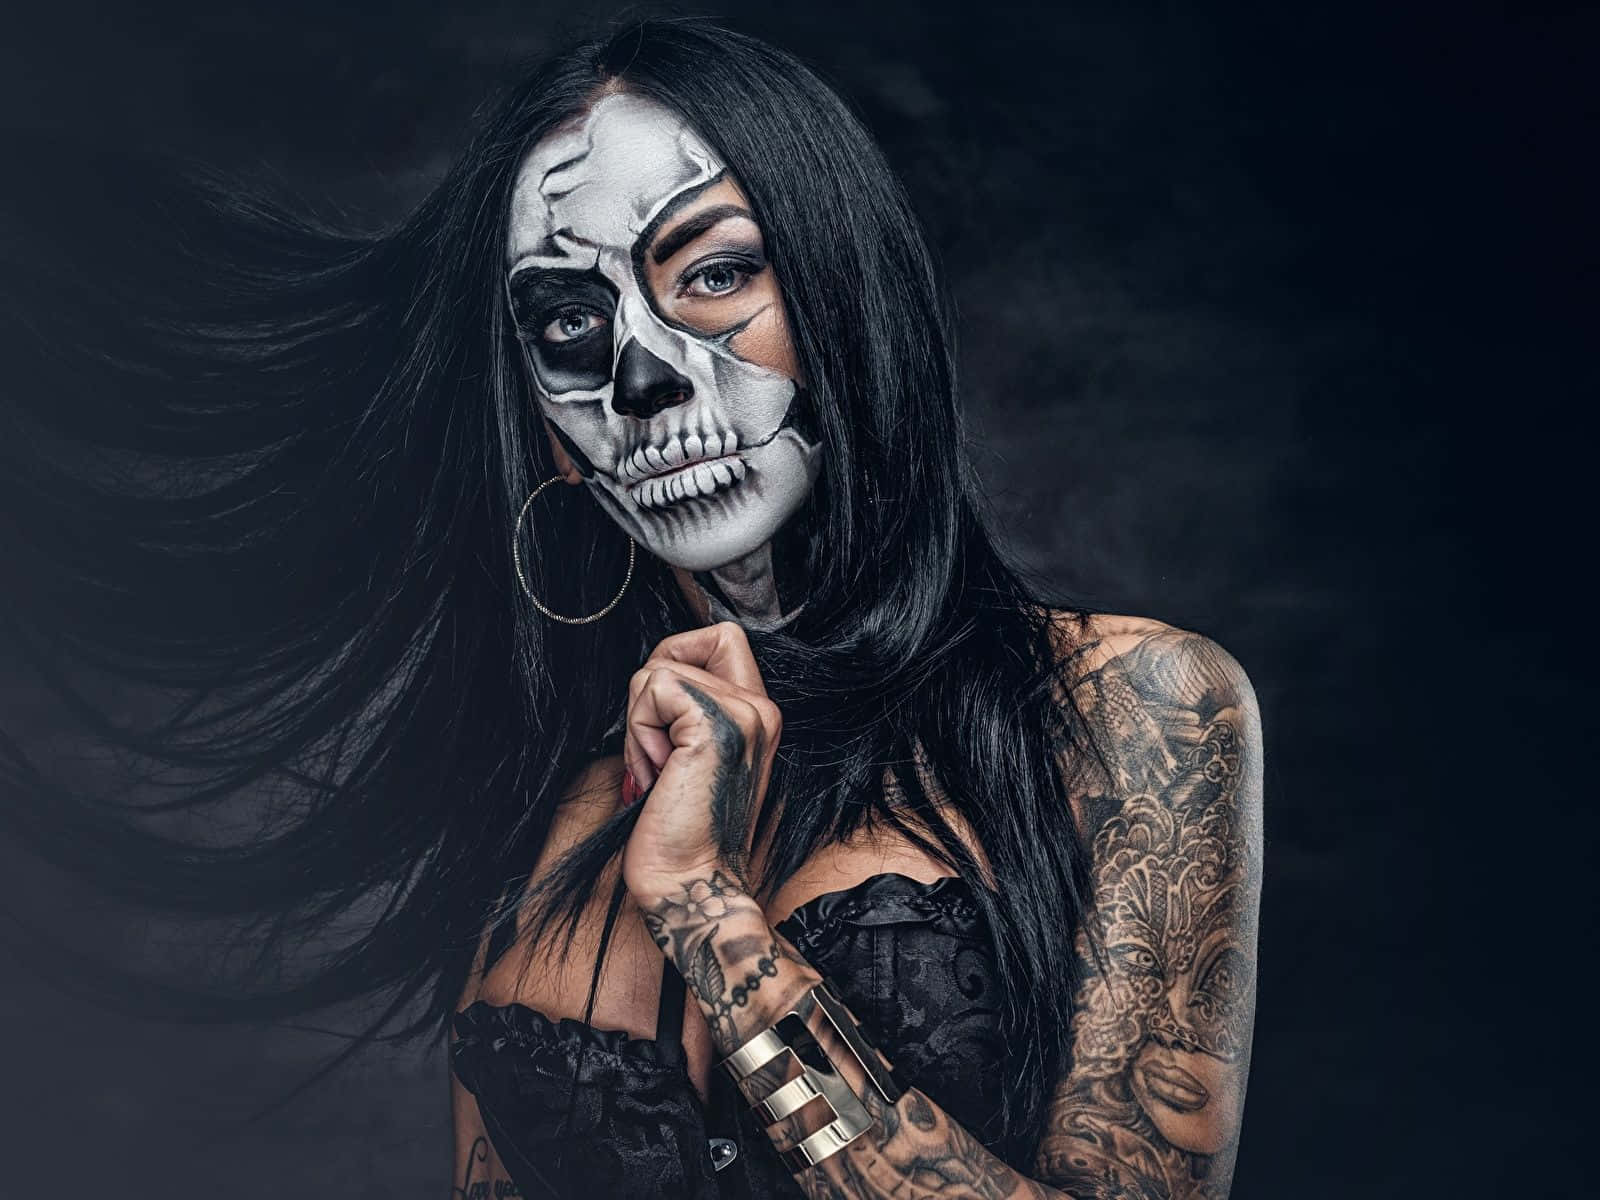 A Woman With Skeleton Makeup And Tattoos